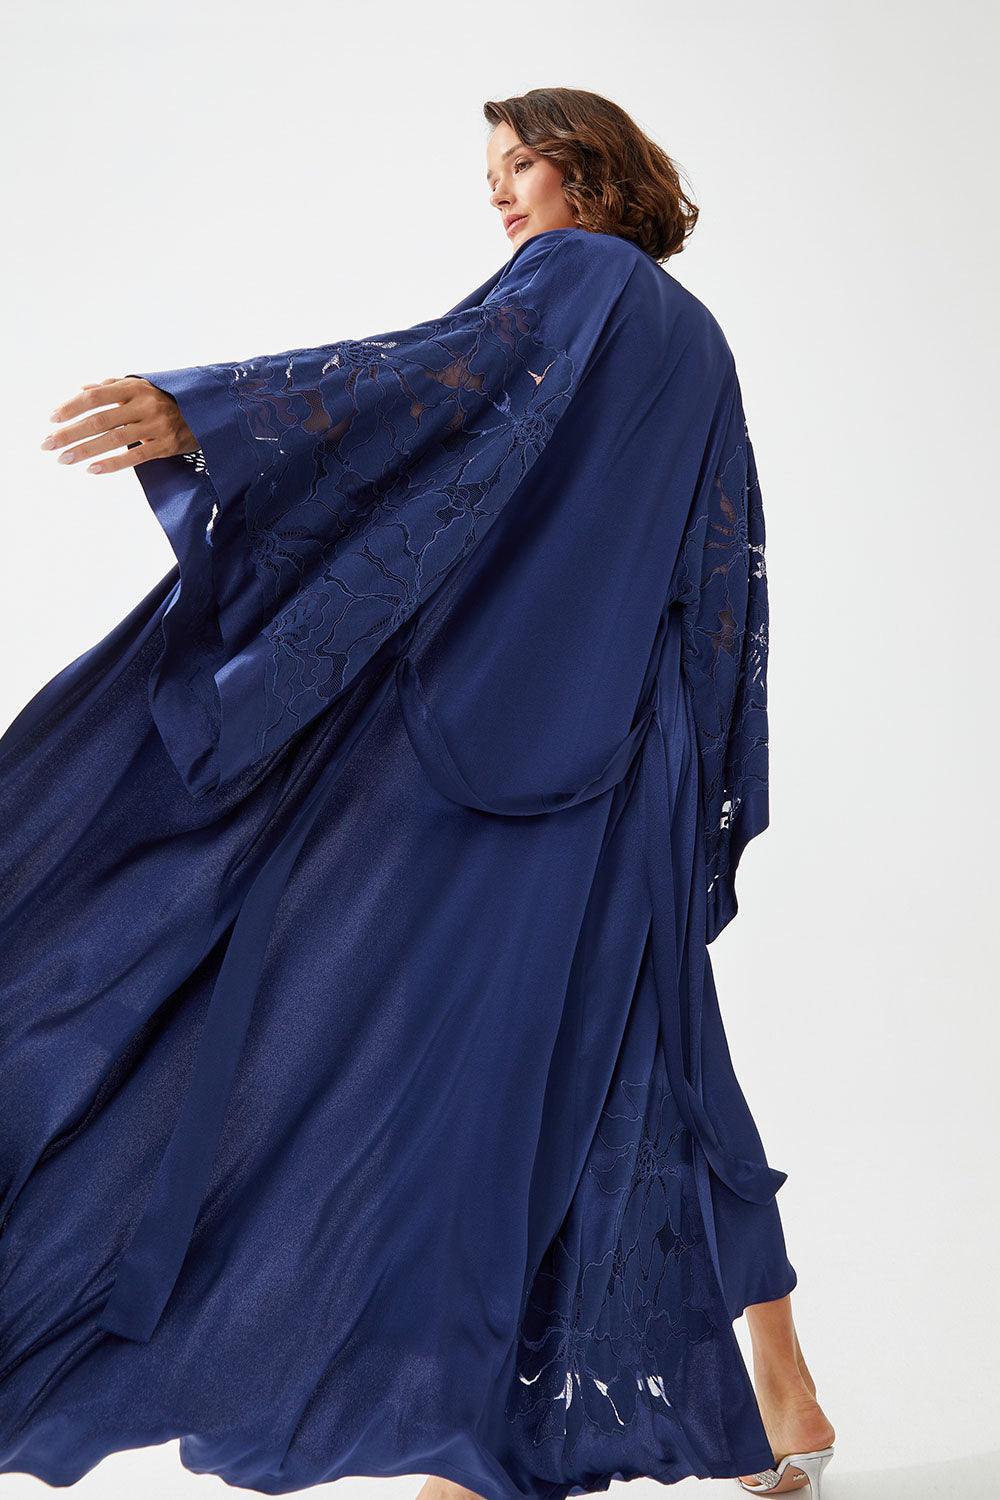 Glory Long Rayon Trimmed with Lace Robe Set - Navy Blue - Bocan